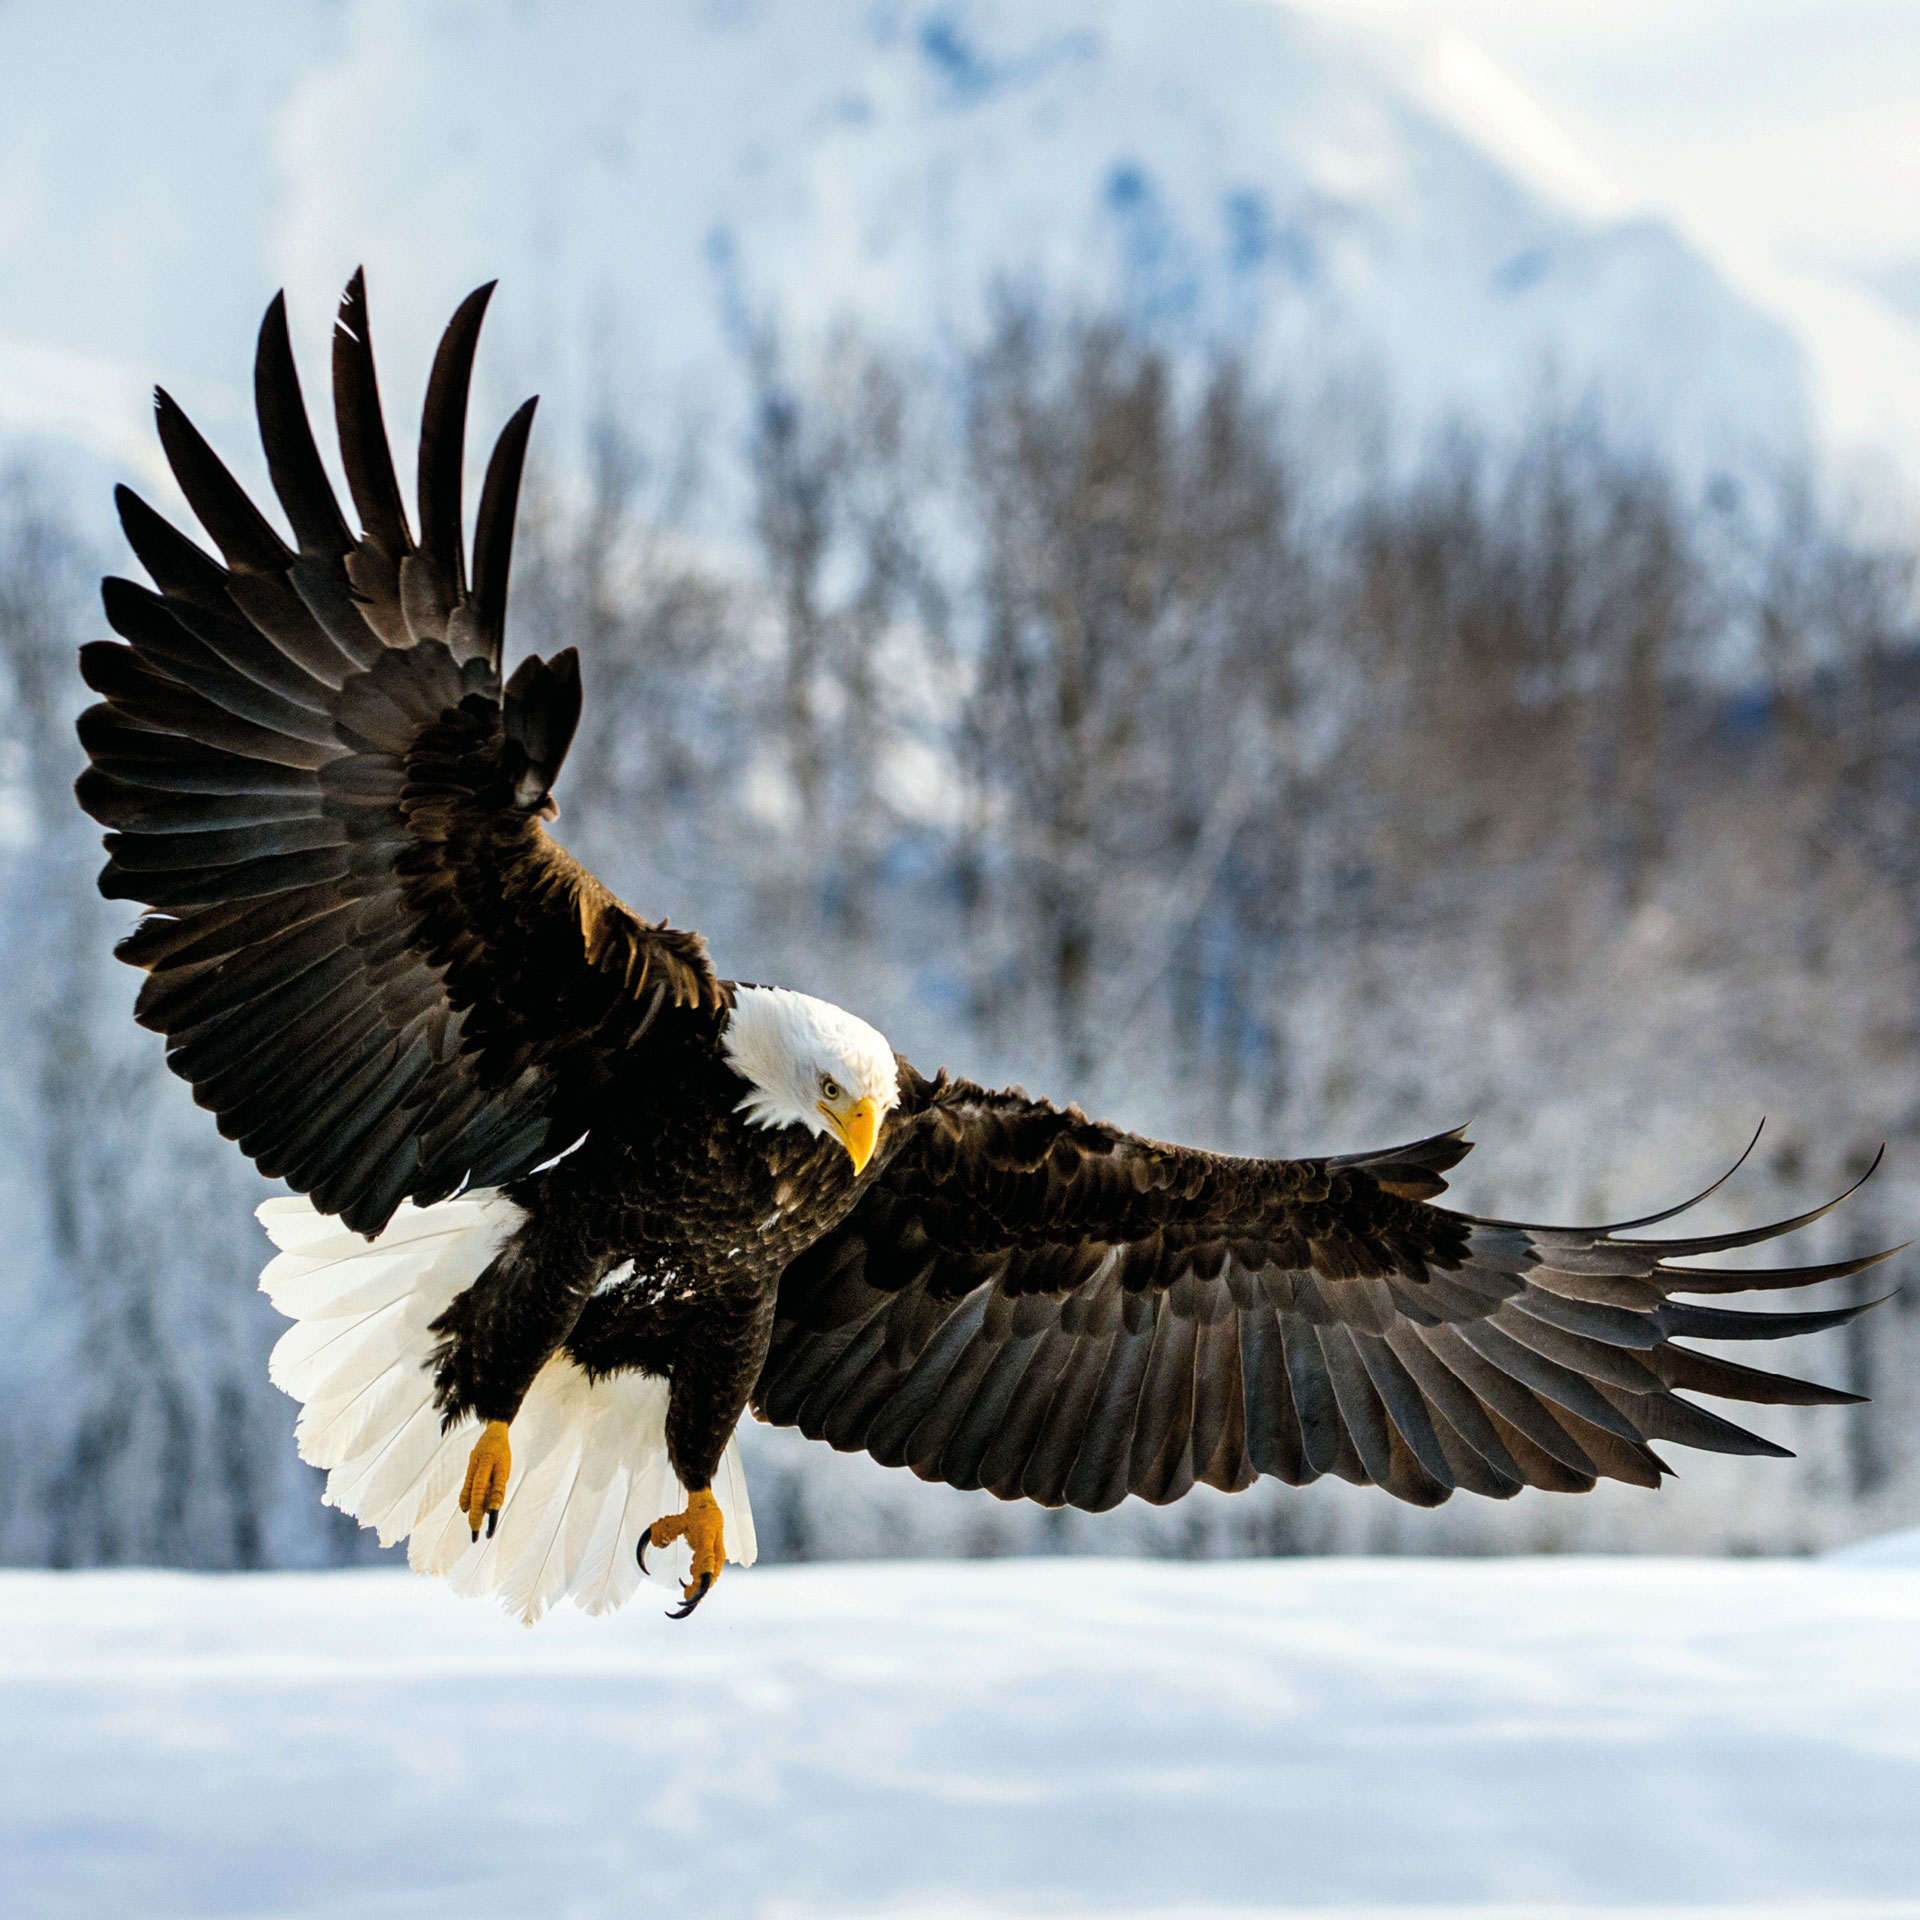 A bald eagle swooping down to the ground to grab prey.